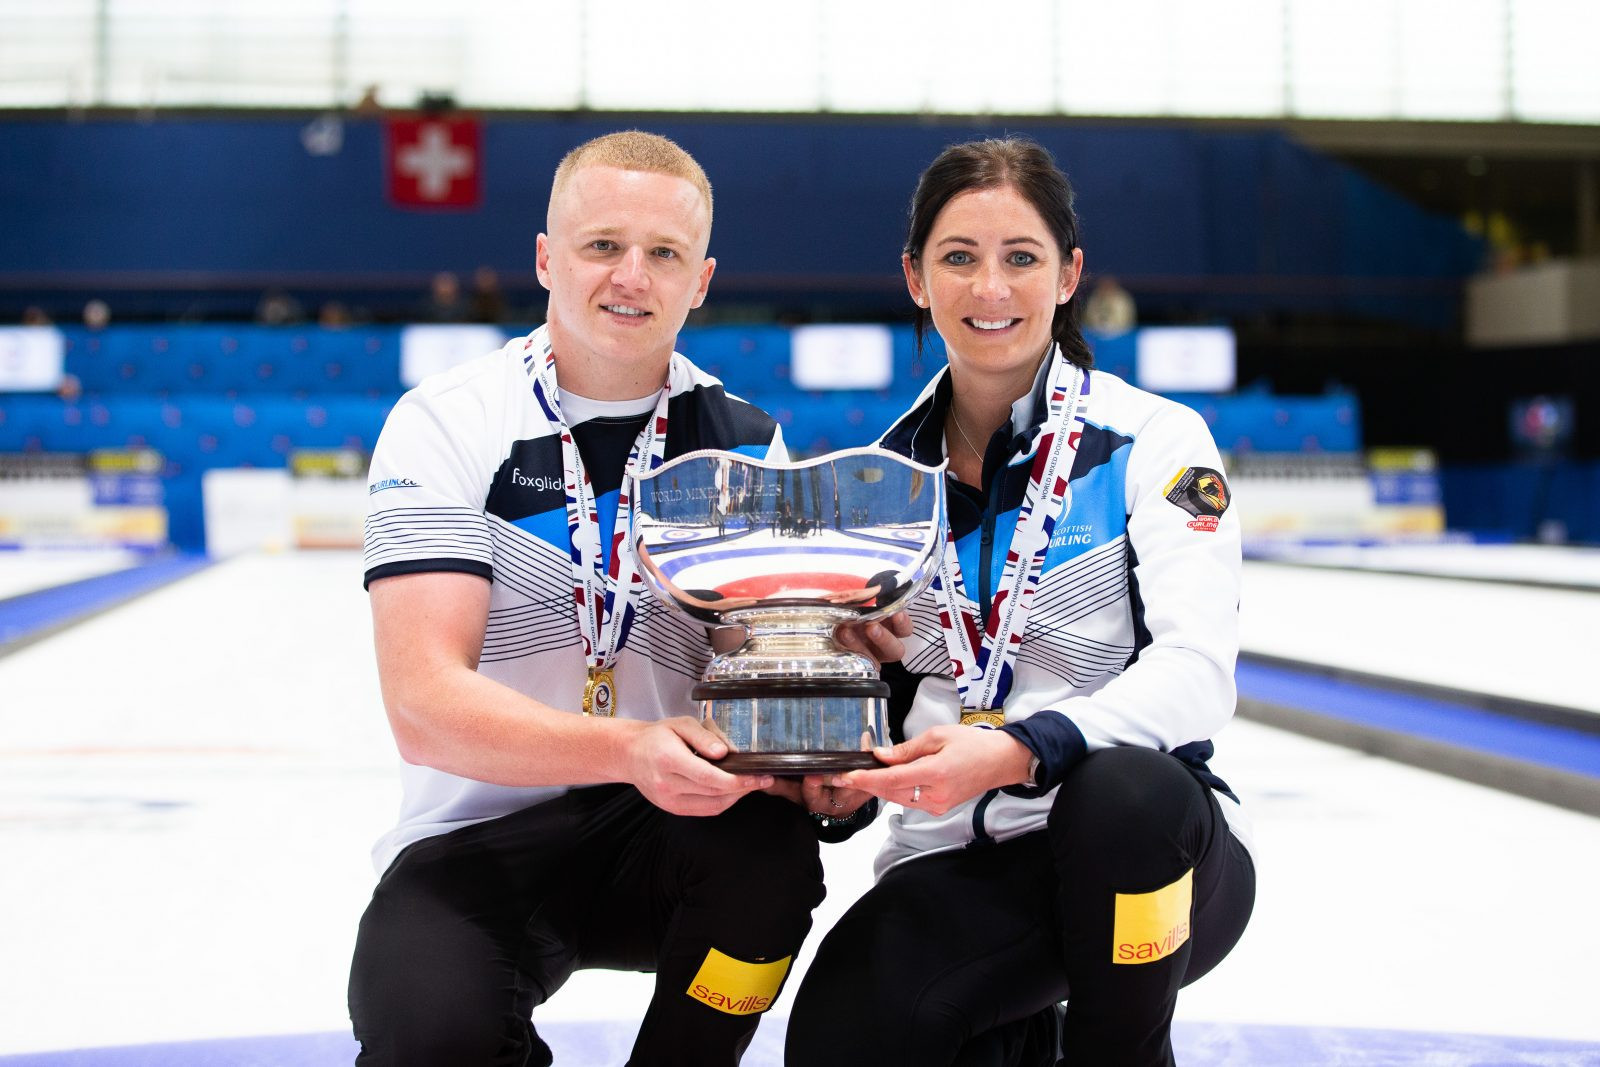 Scotland won this year's World Mixed Doubles Curling Championships in Geneva ©World Curling